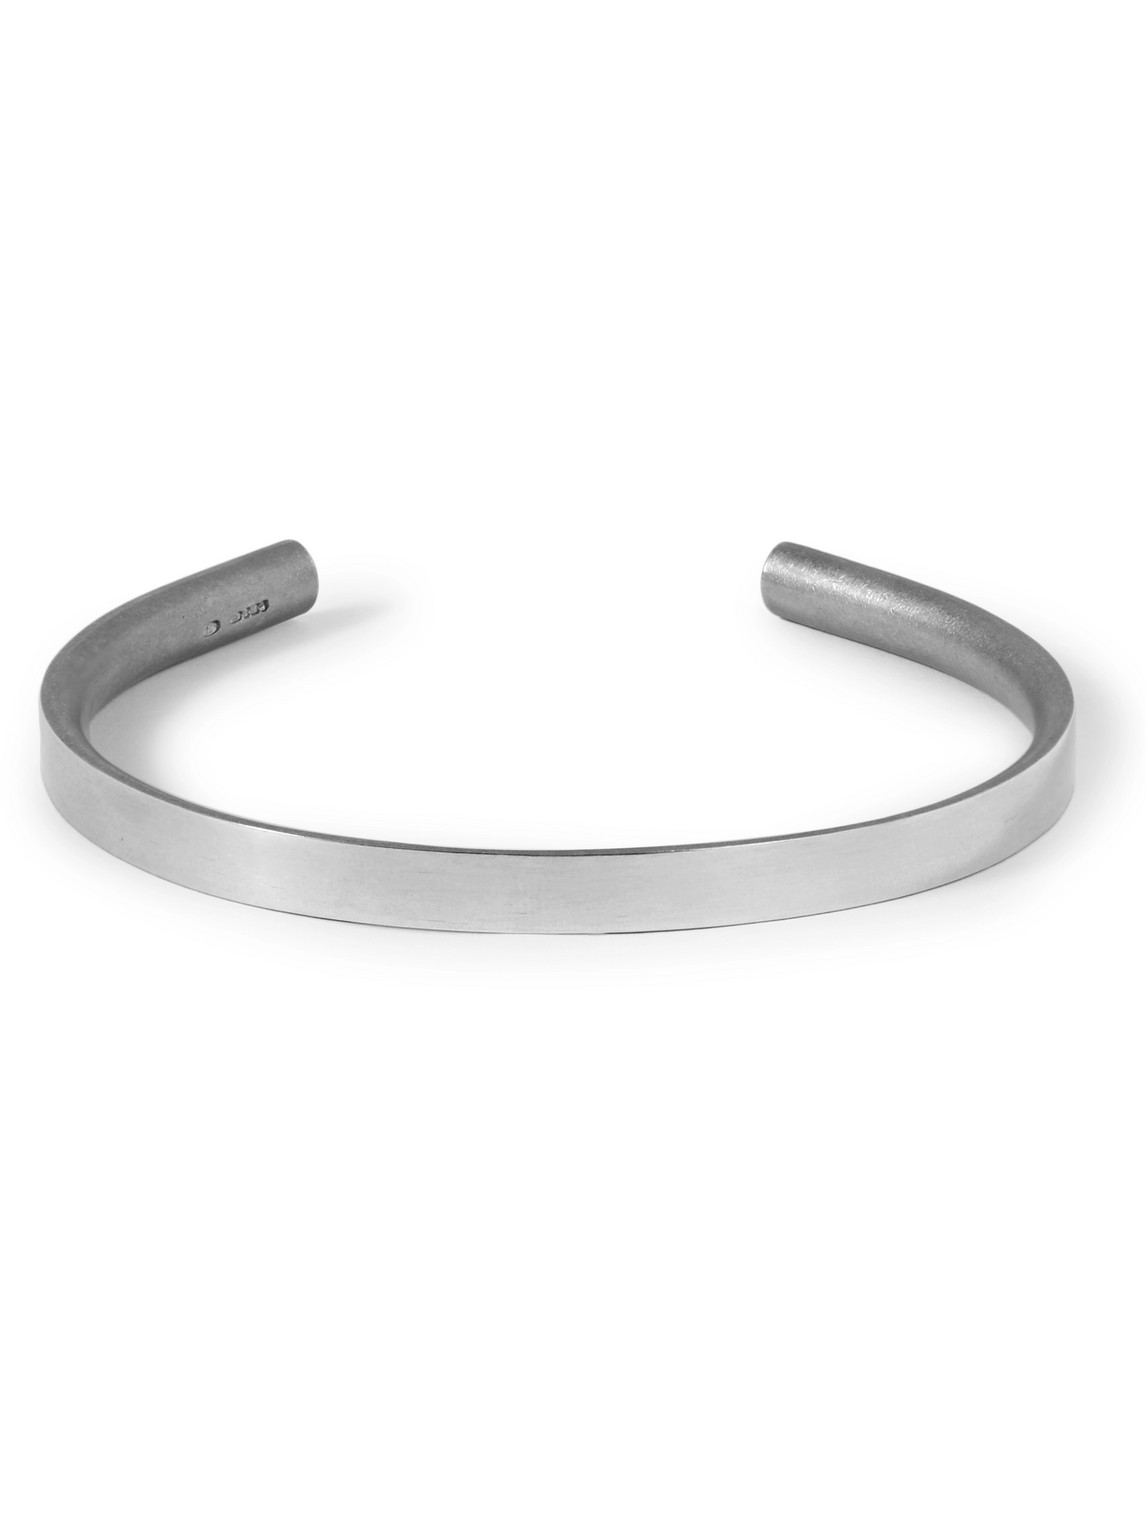 Alice Made This P6 Bancroft Polished Sterling Silver Cuff